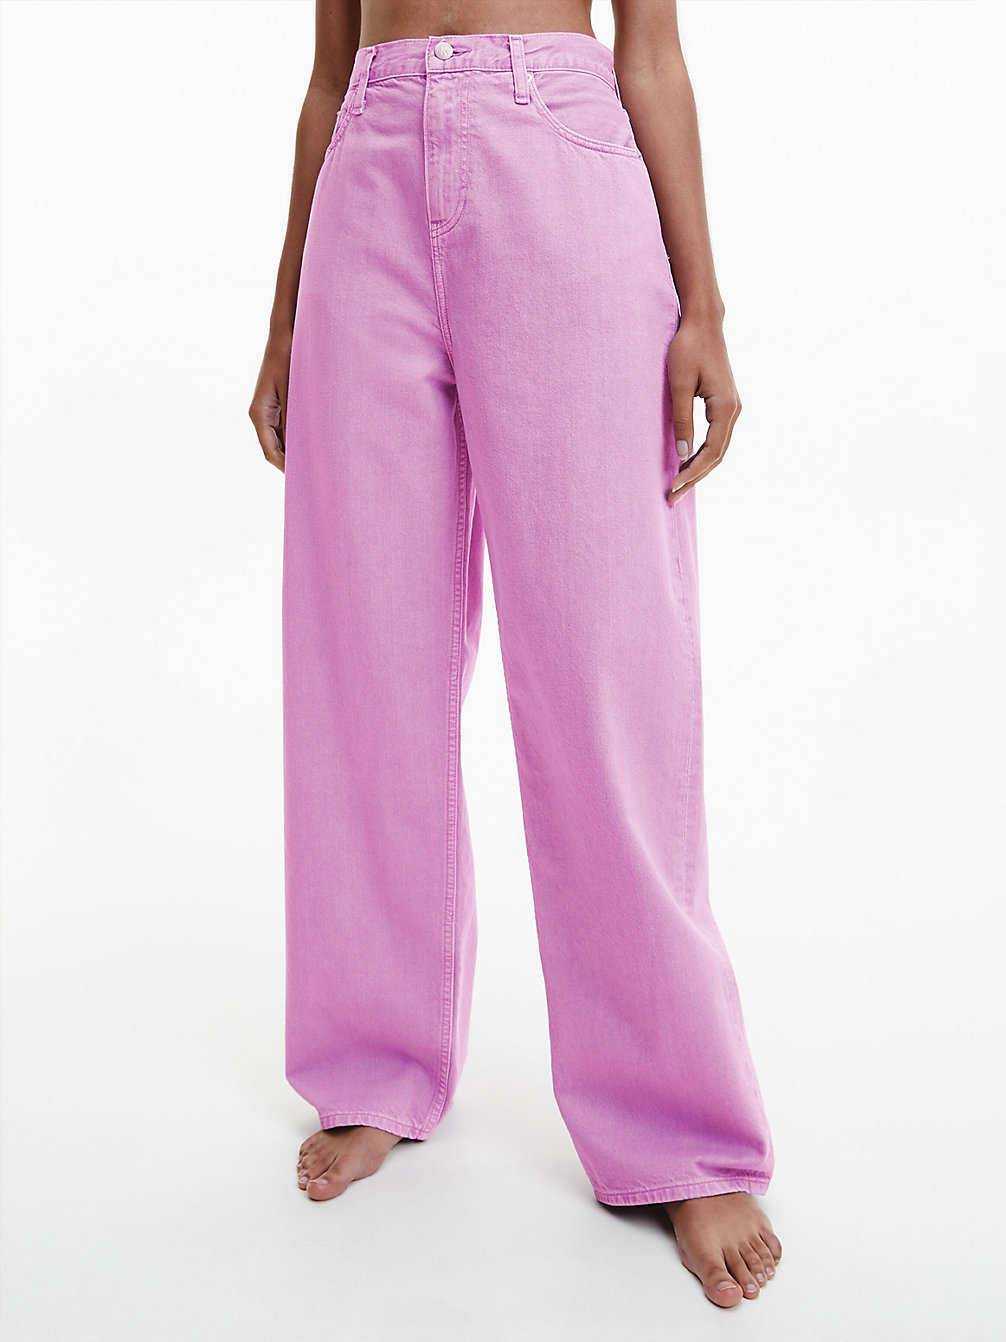 LAVENDER Jean Relaxed High Rise undefined femmes Calvin Klein